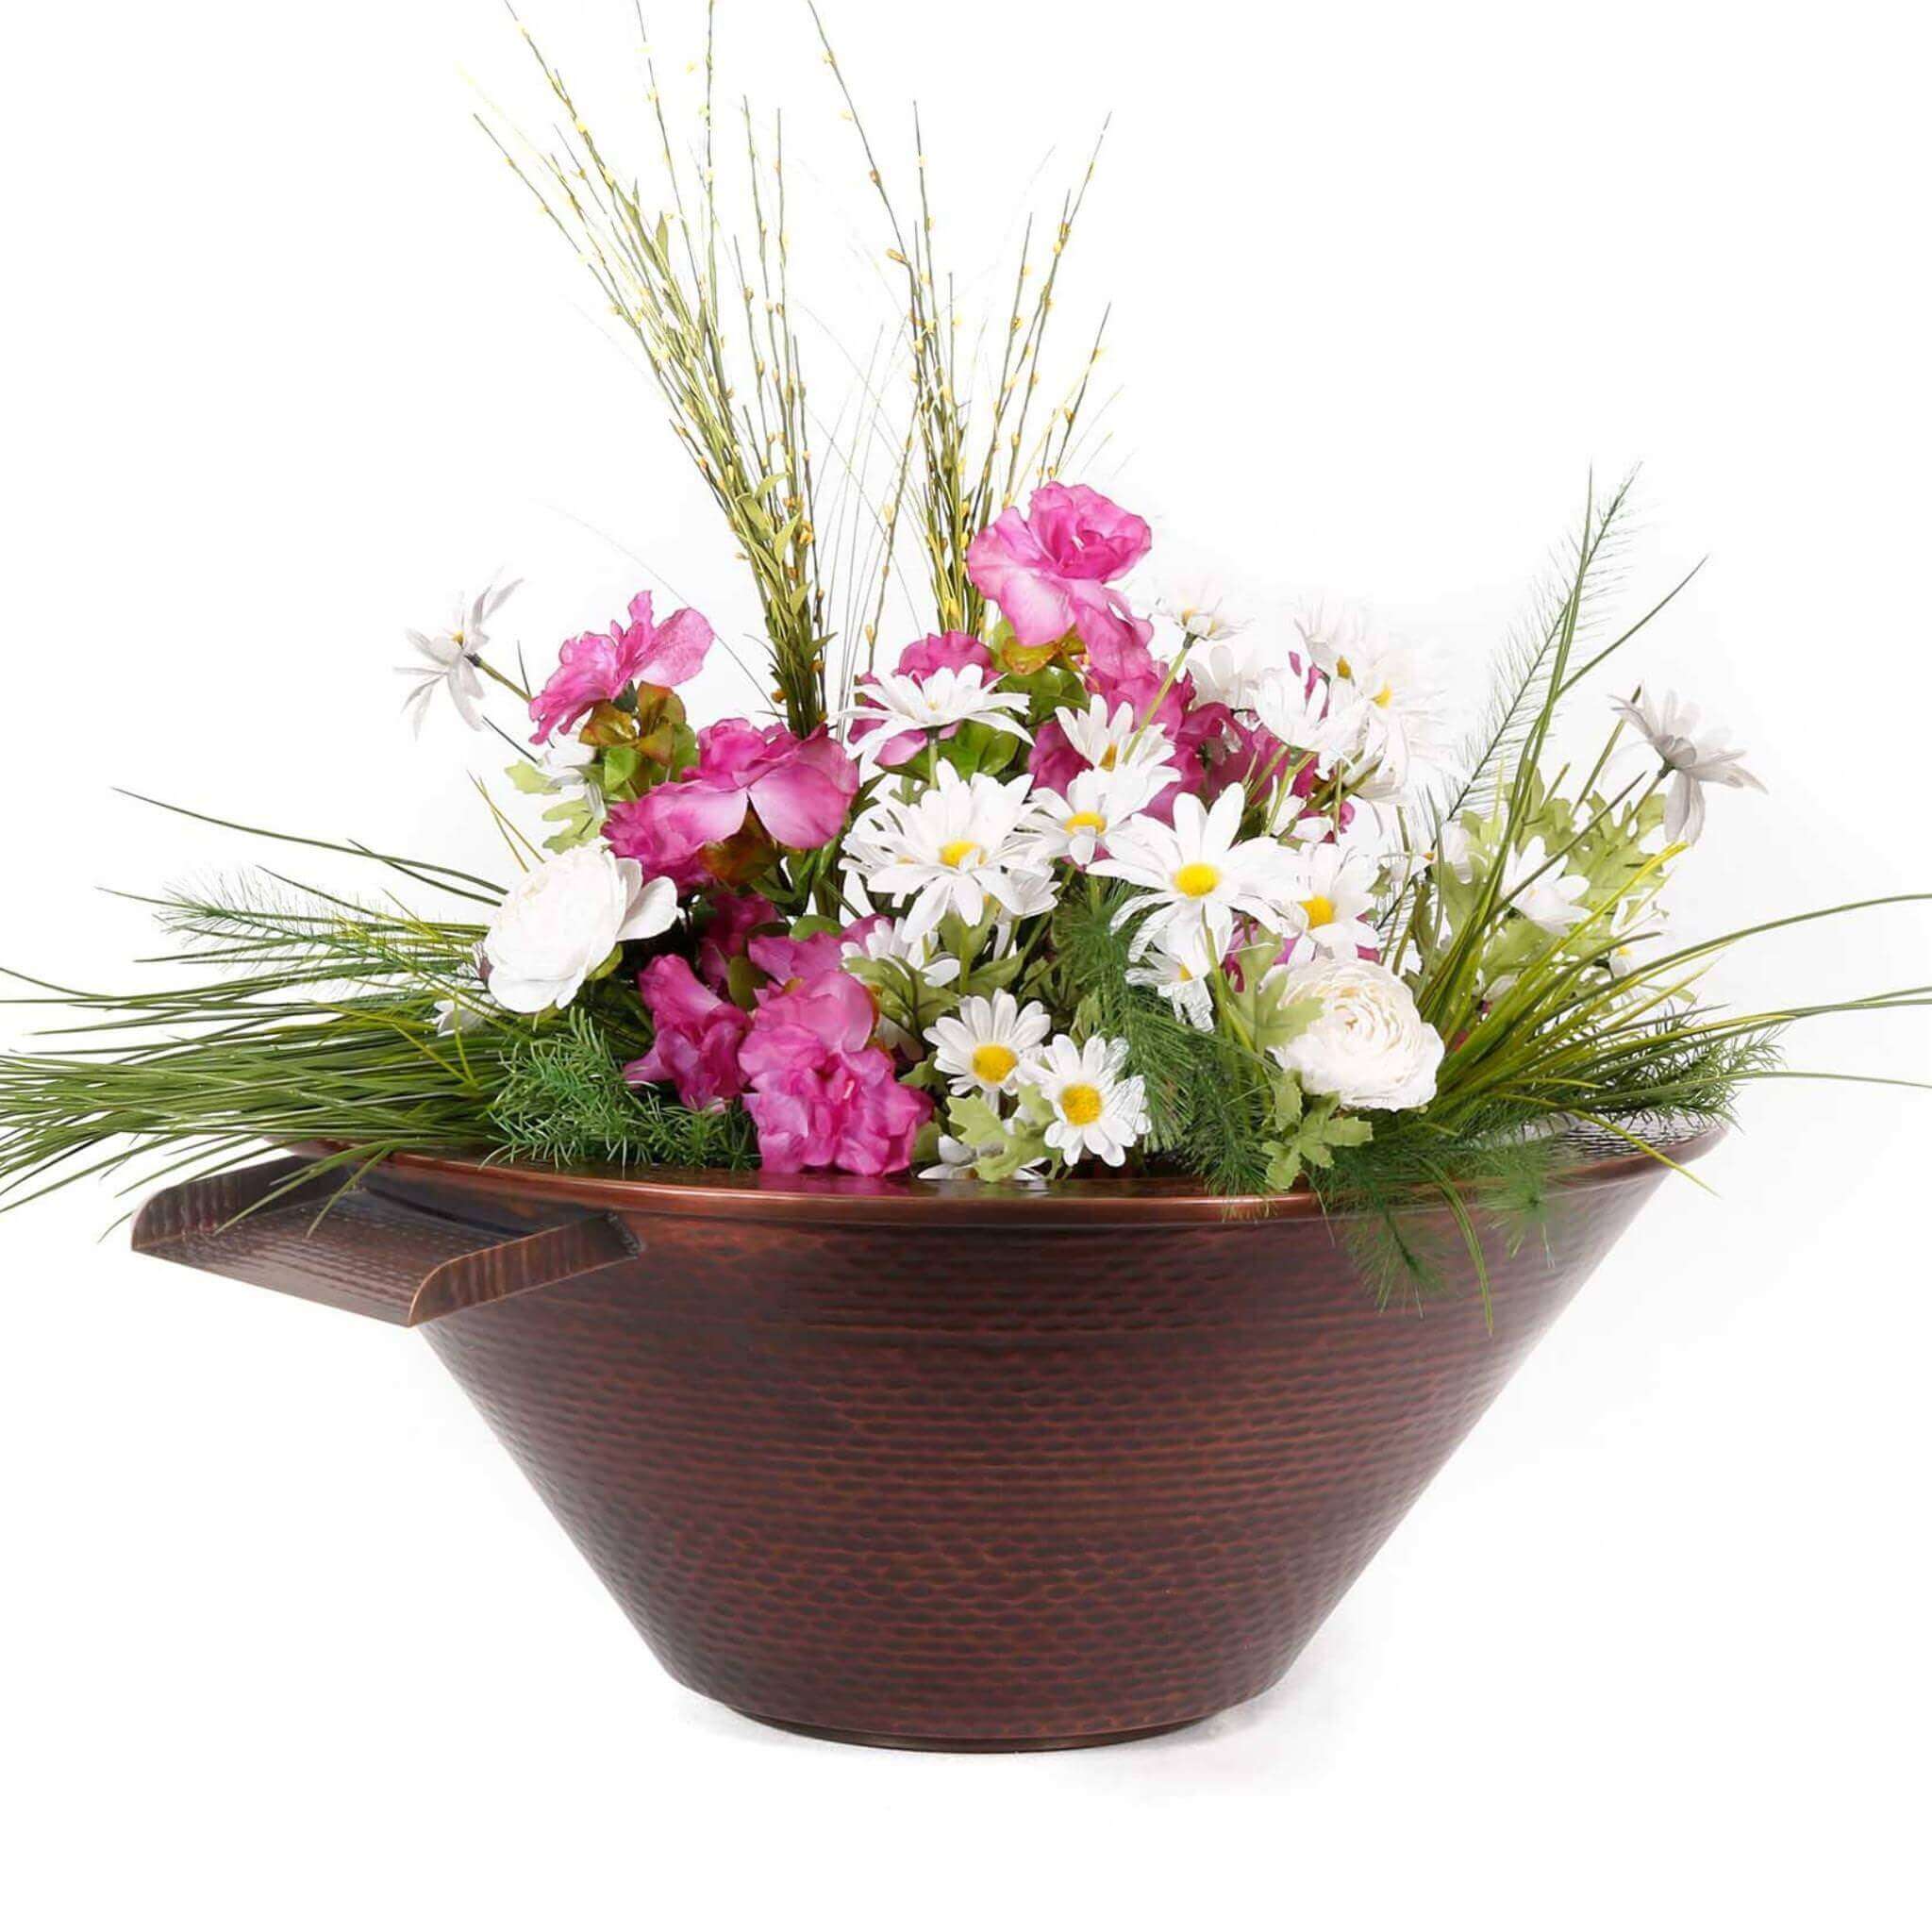 "Cazo" Copper Planter & Water Bowl - The Outdoor Plus